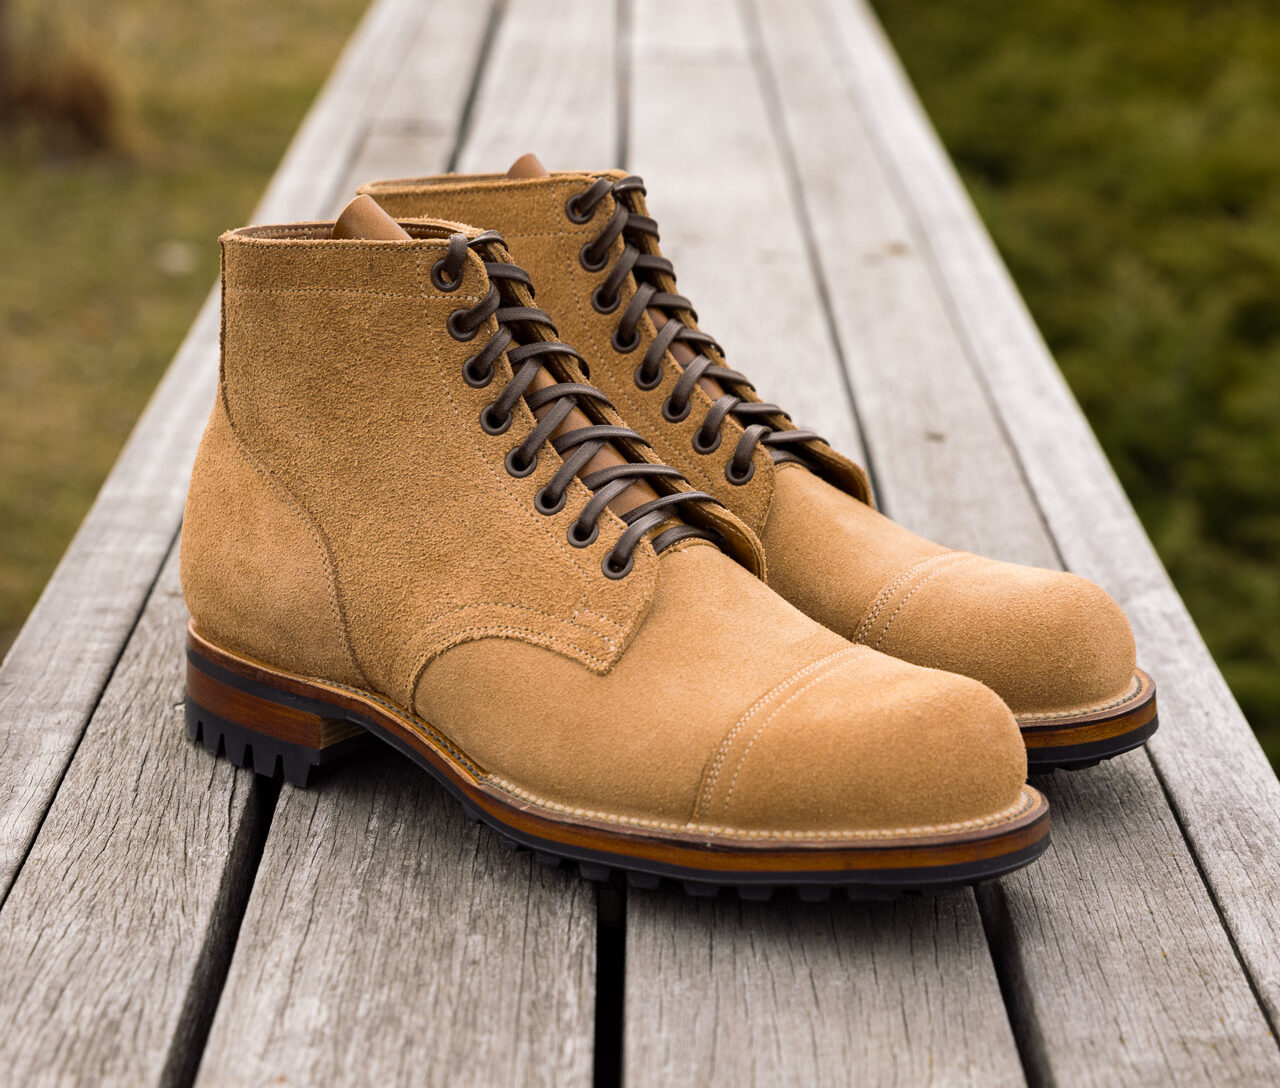 Brooklyn Clothing x Viberg - Service Boot 2040 - Marine Field Shoe Roughout